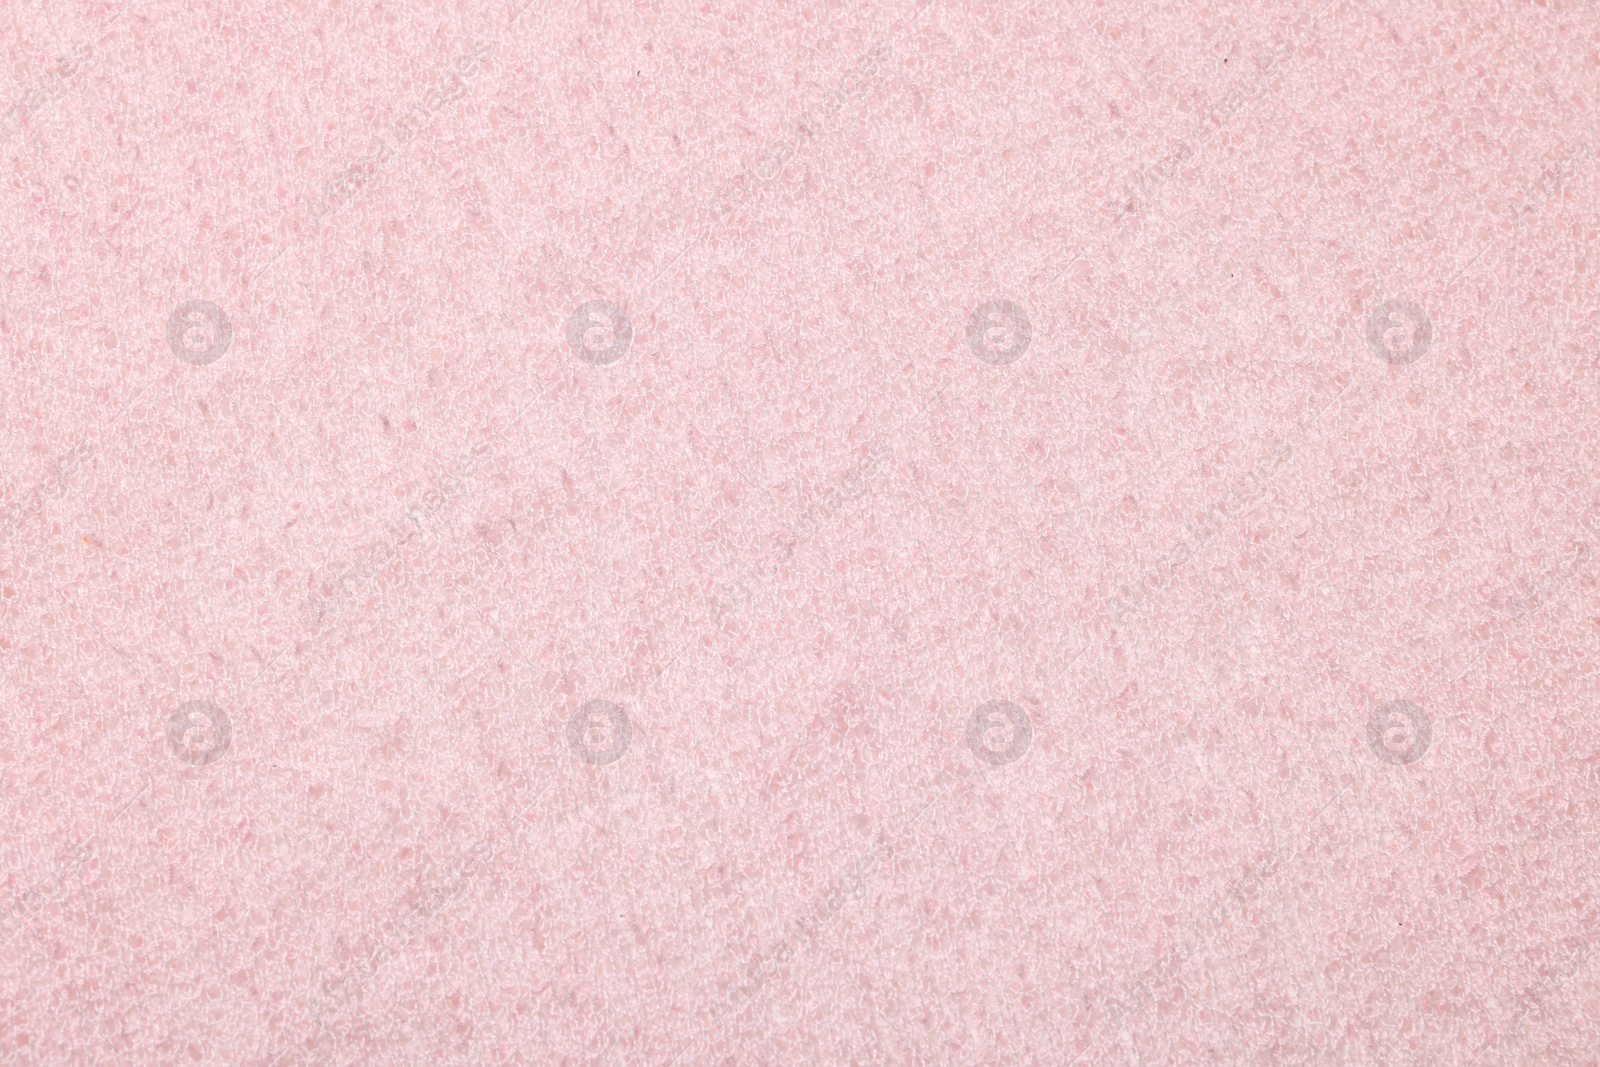 Photo of Texture of soft pink fabric as background, top view